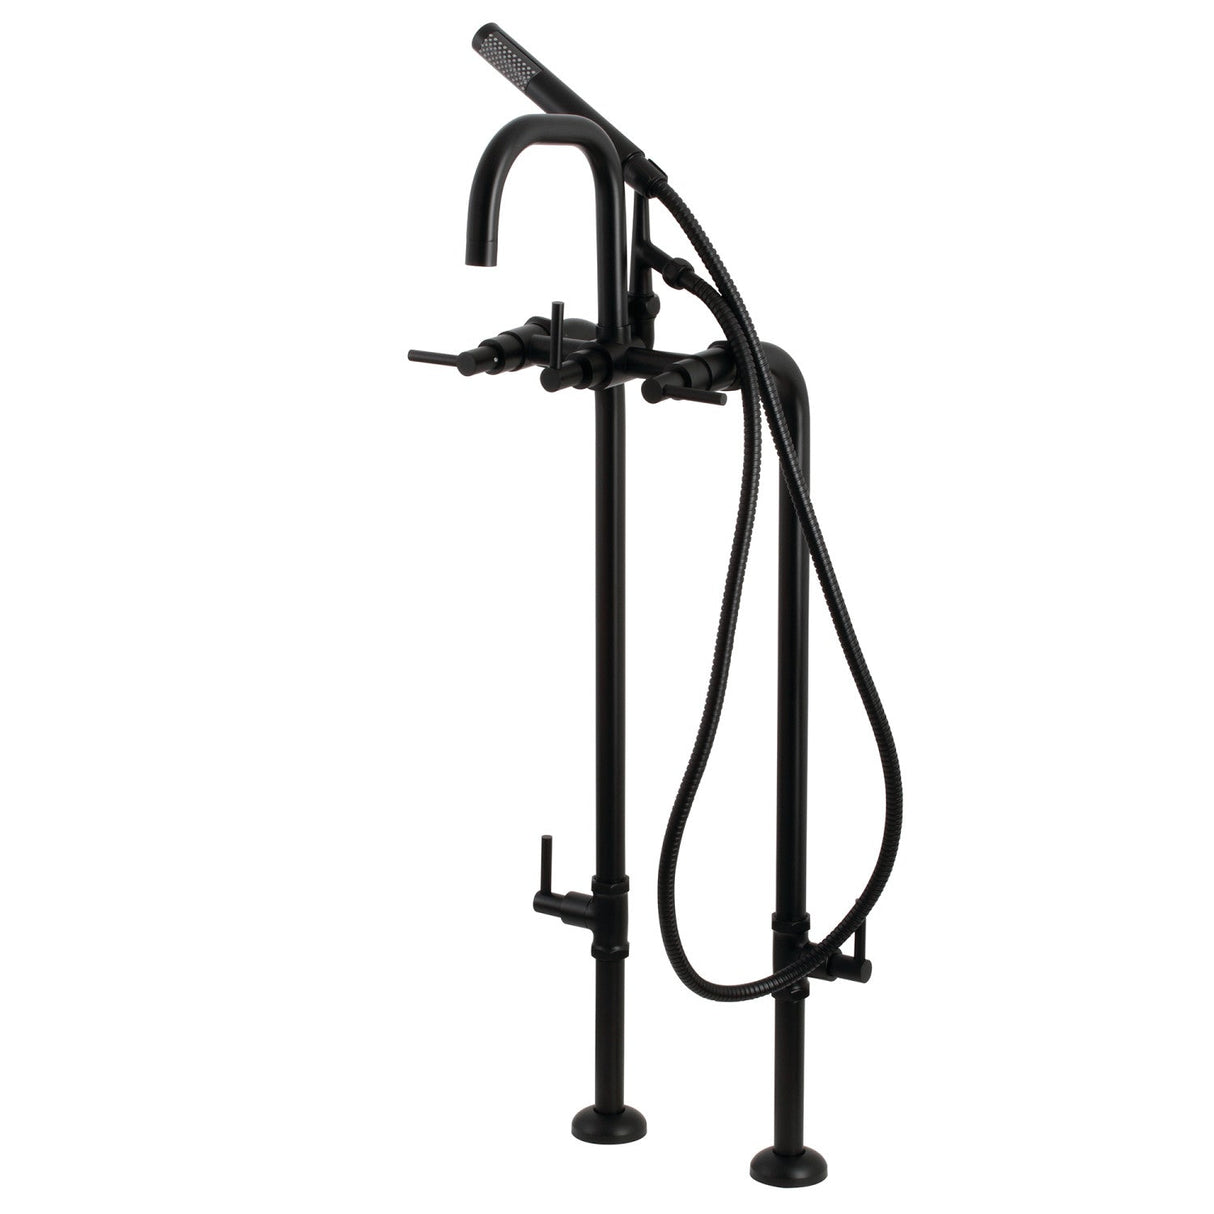 Concord CCK8400DL Freestanding Tub Faucet with Supply Line and Stop Valve, Matte Black